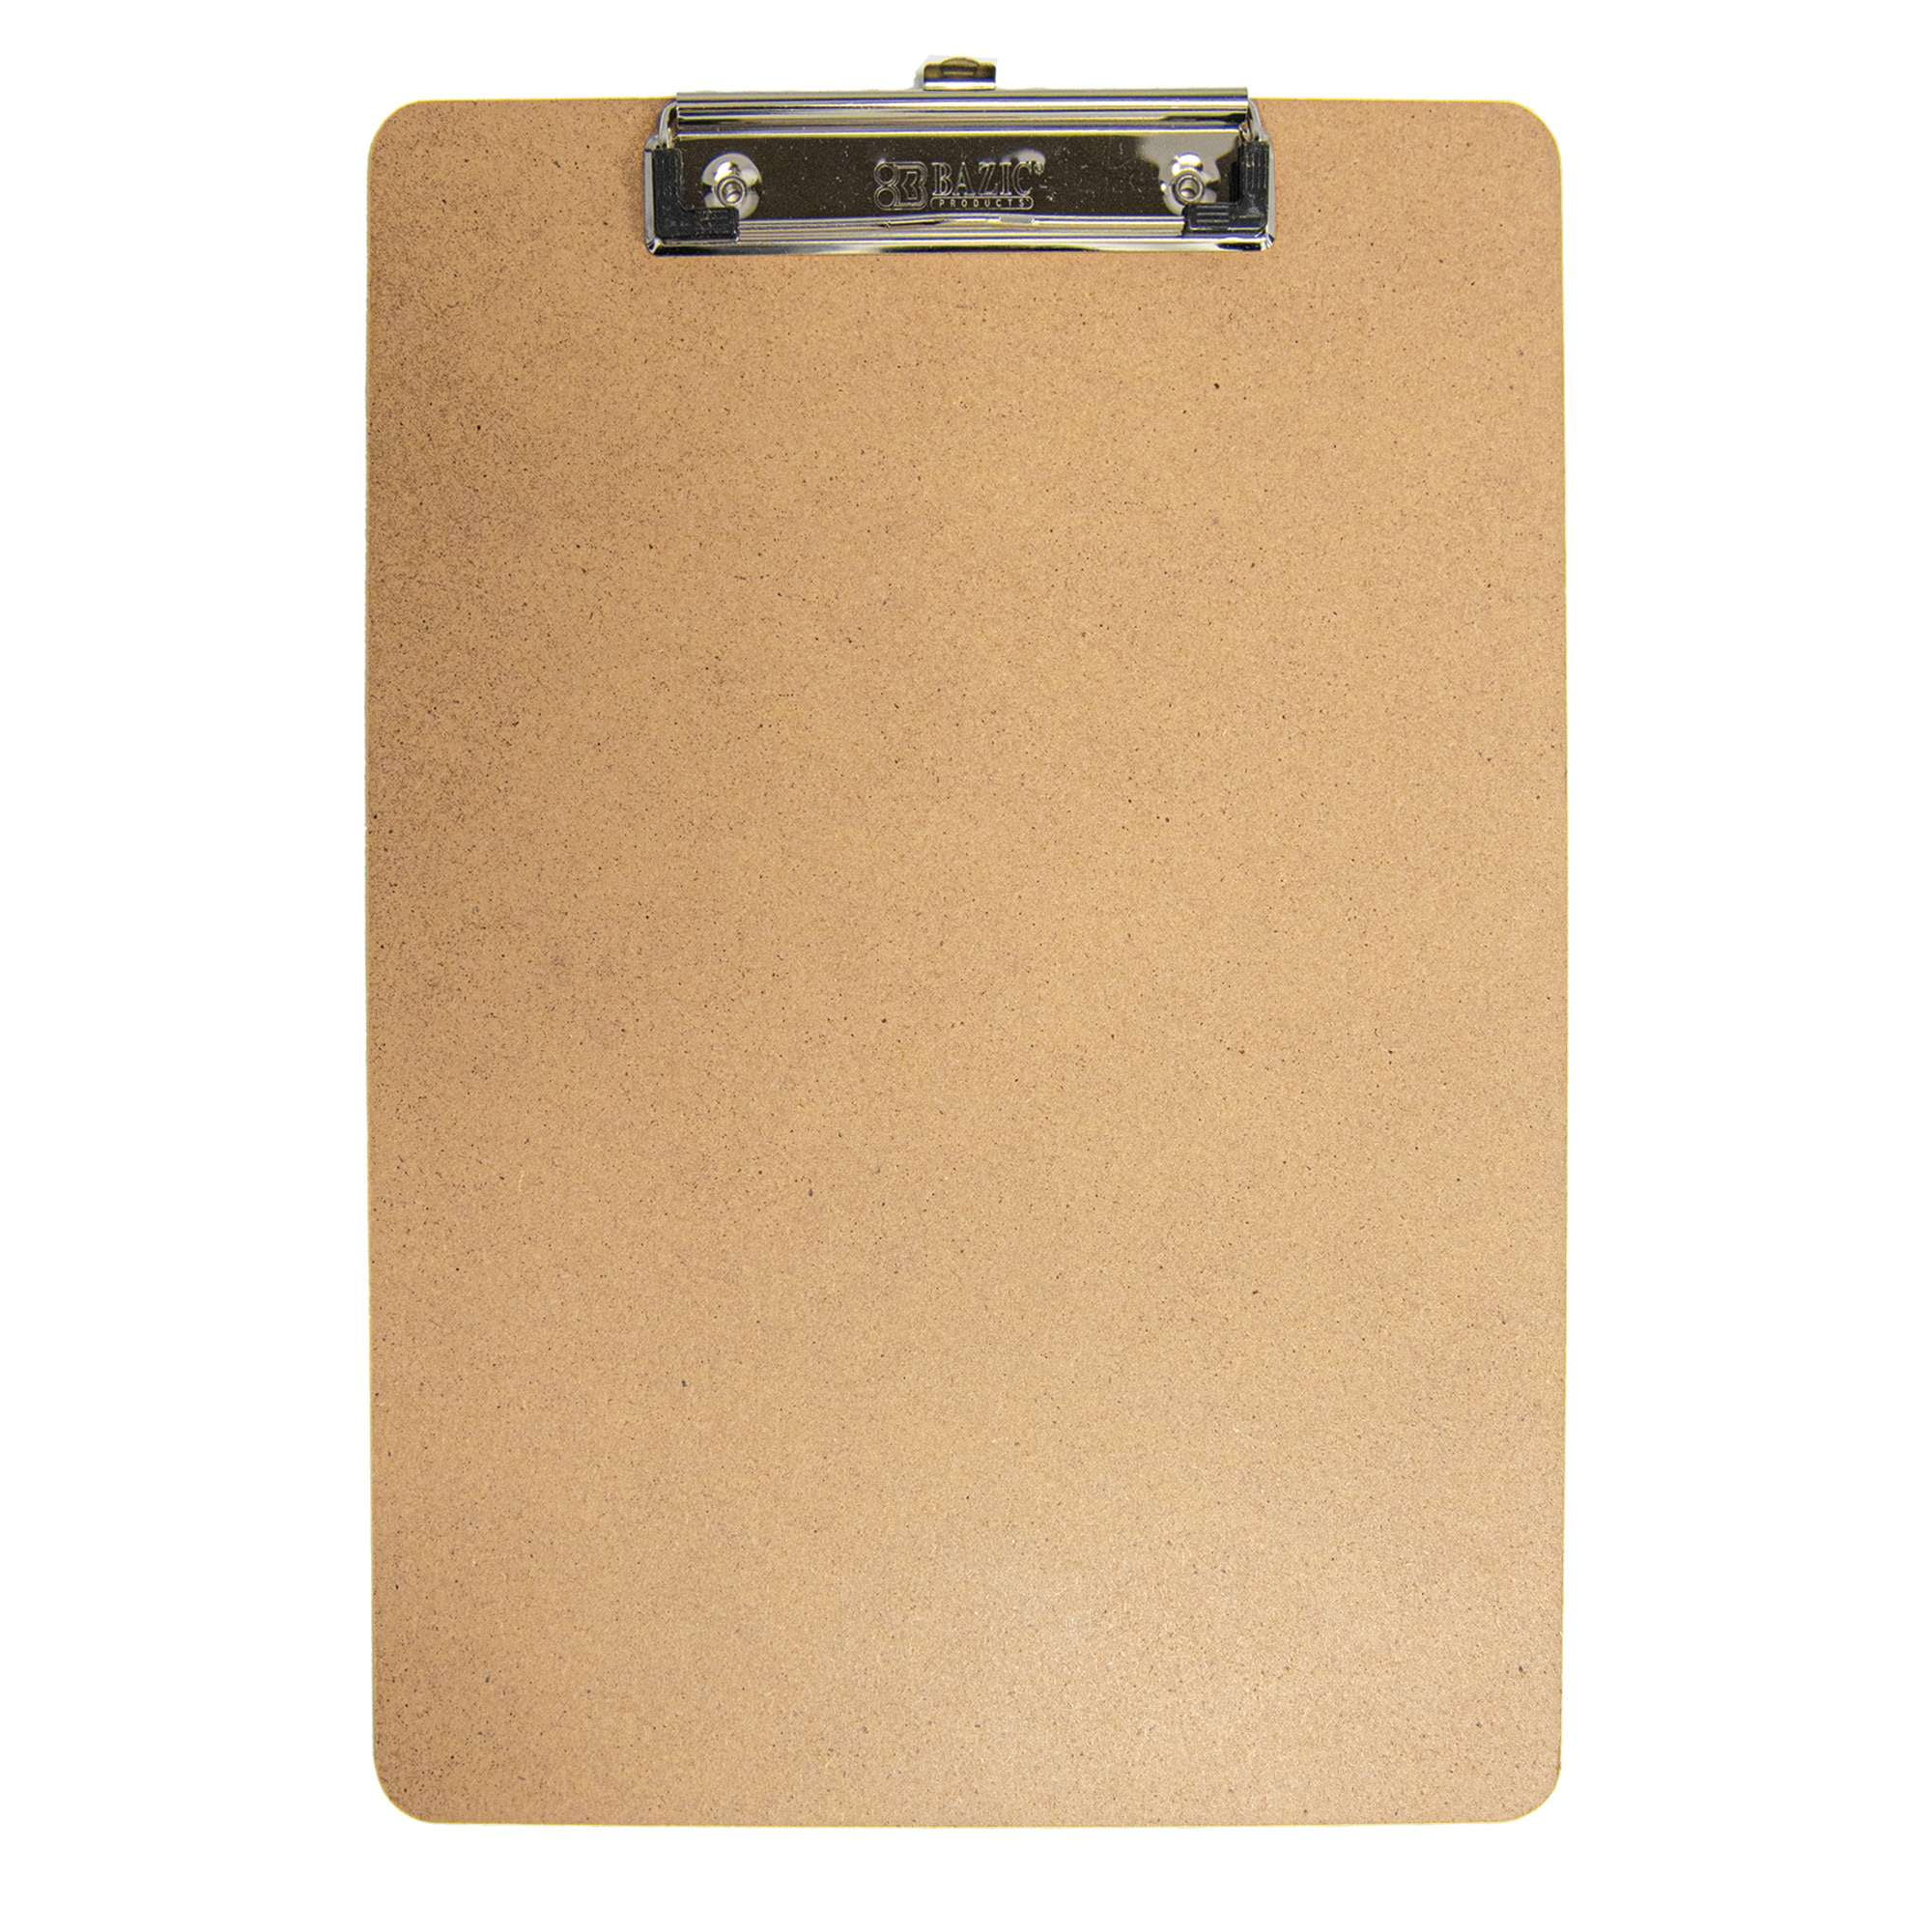 Low Profile Clip Officemate Recycled Wood Clipboard Letter Size 9 x 12.5 Inches 83219 